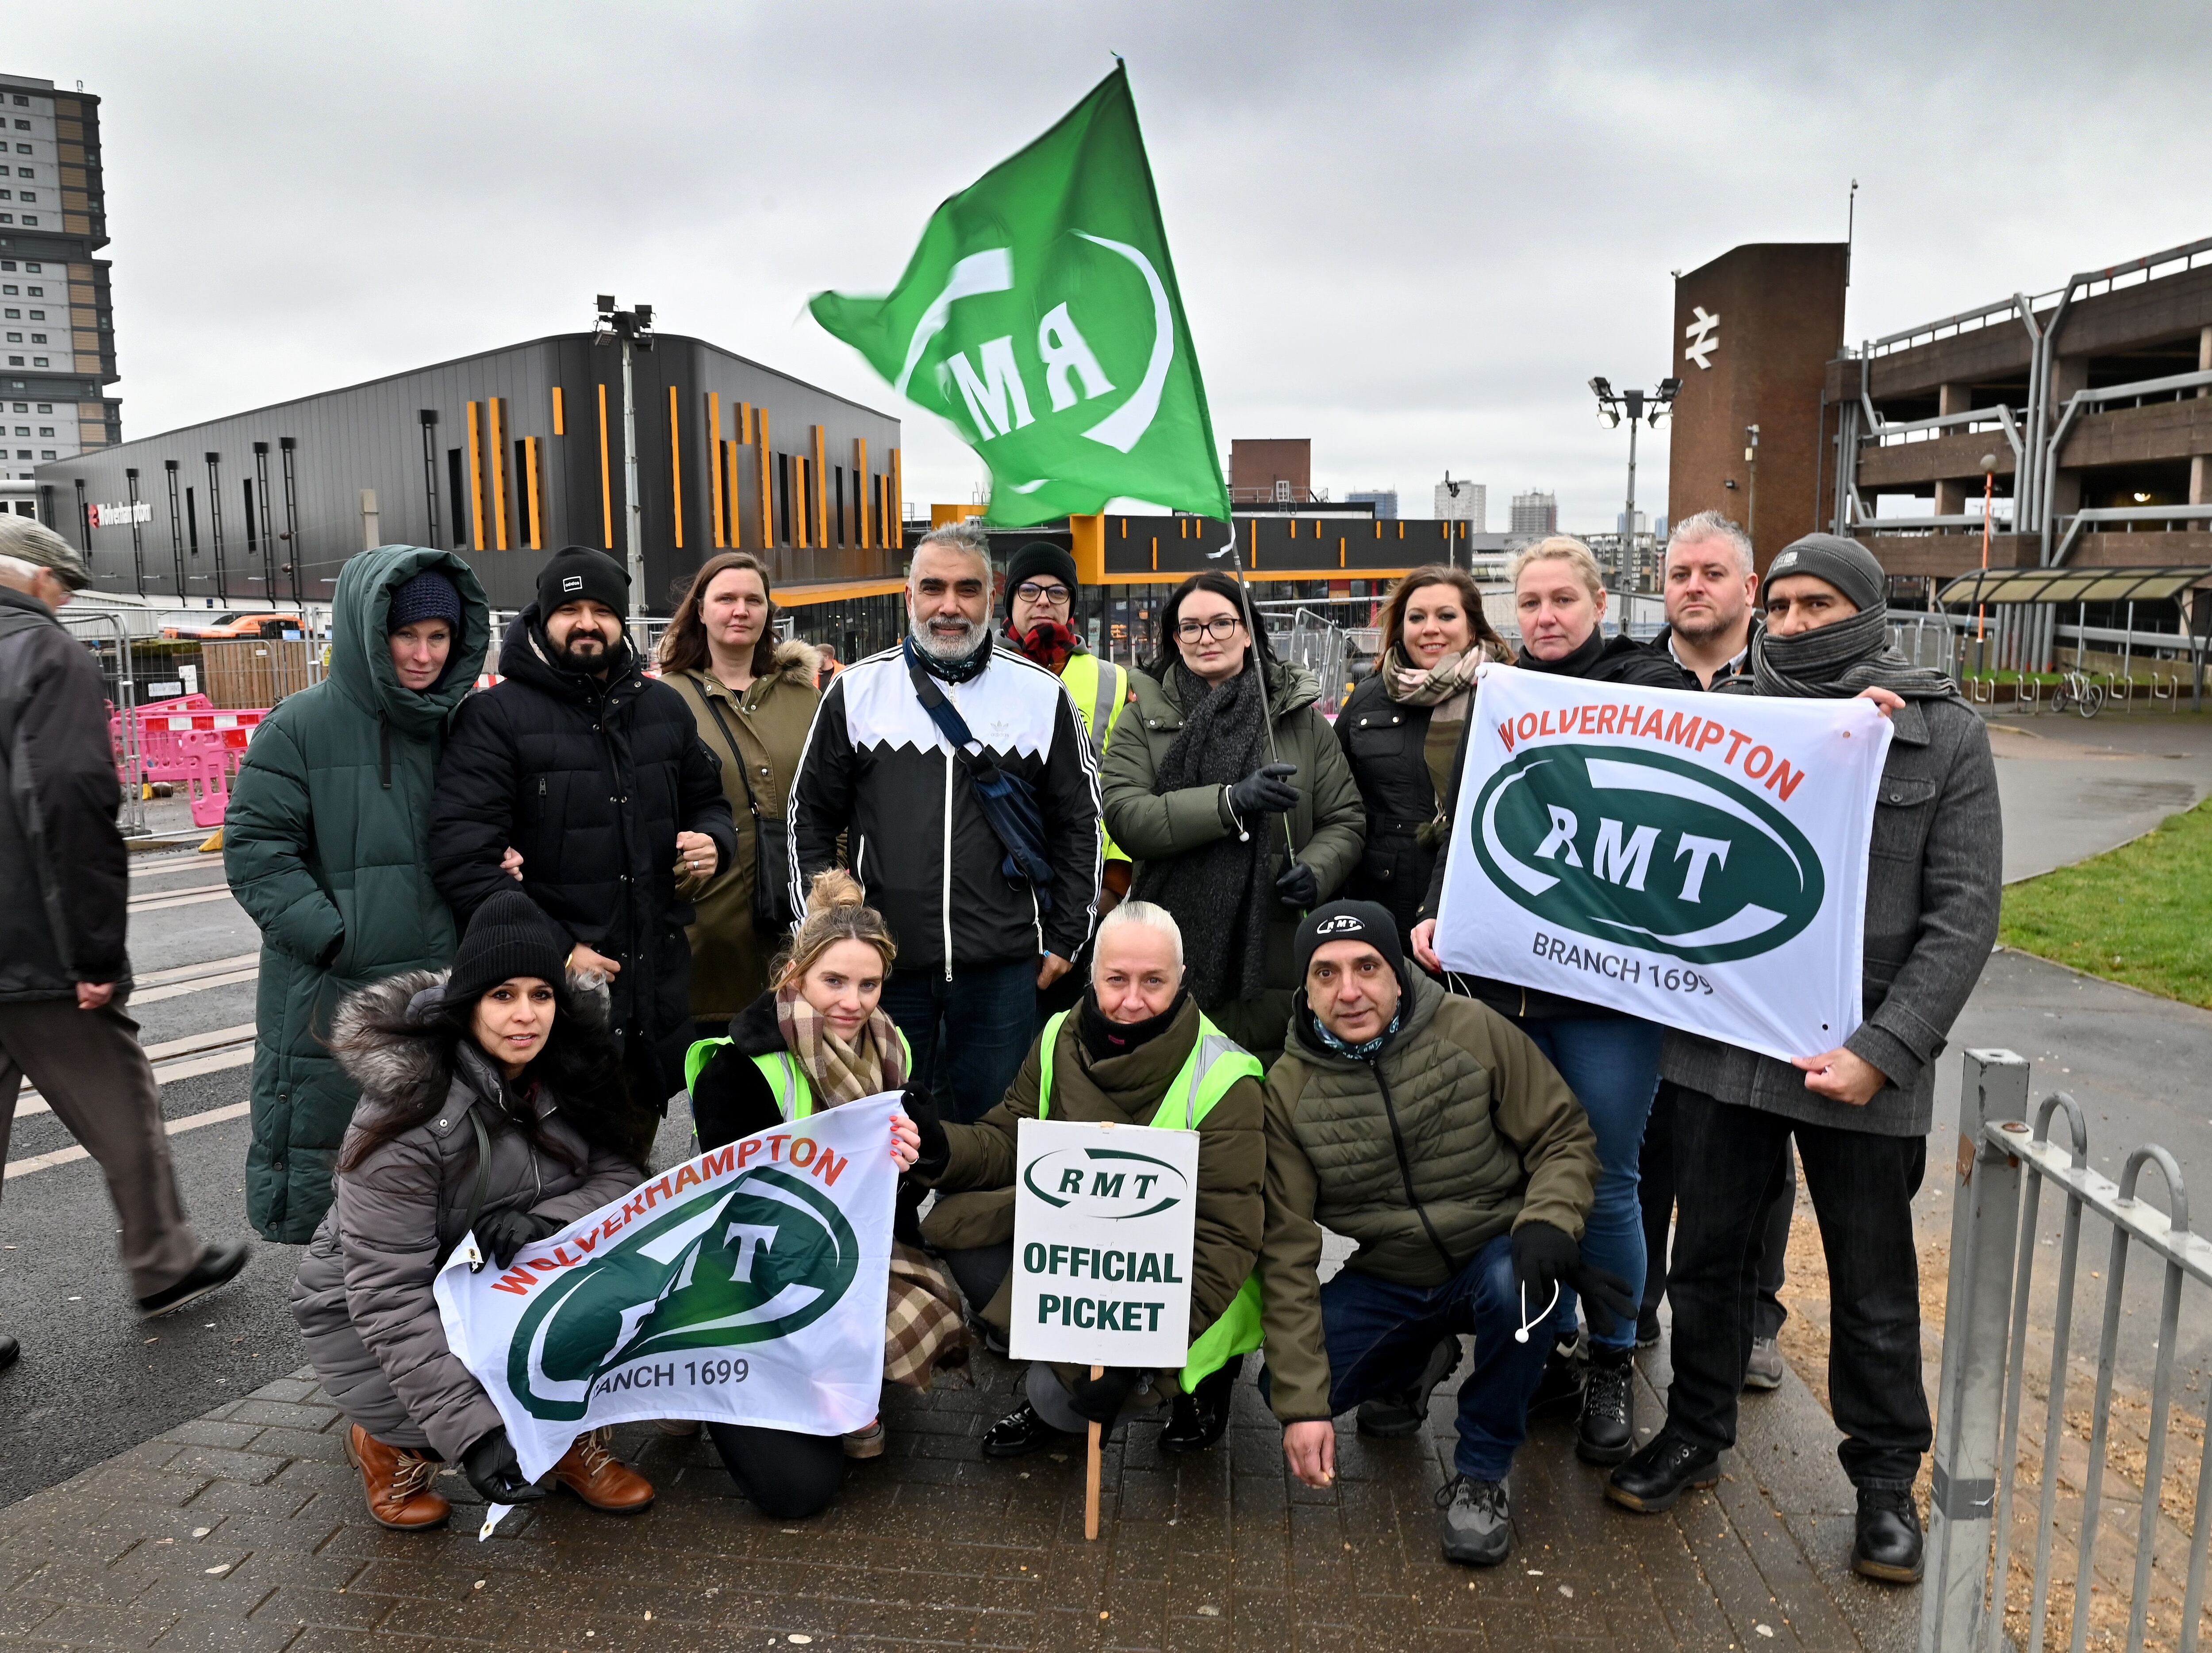 Railway workers take to picket lines as industrial action disrupts West Midlands services